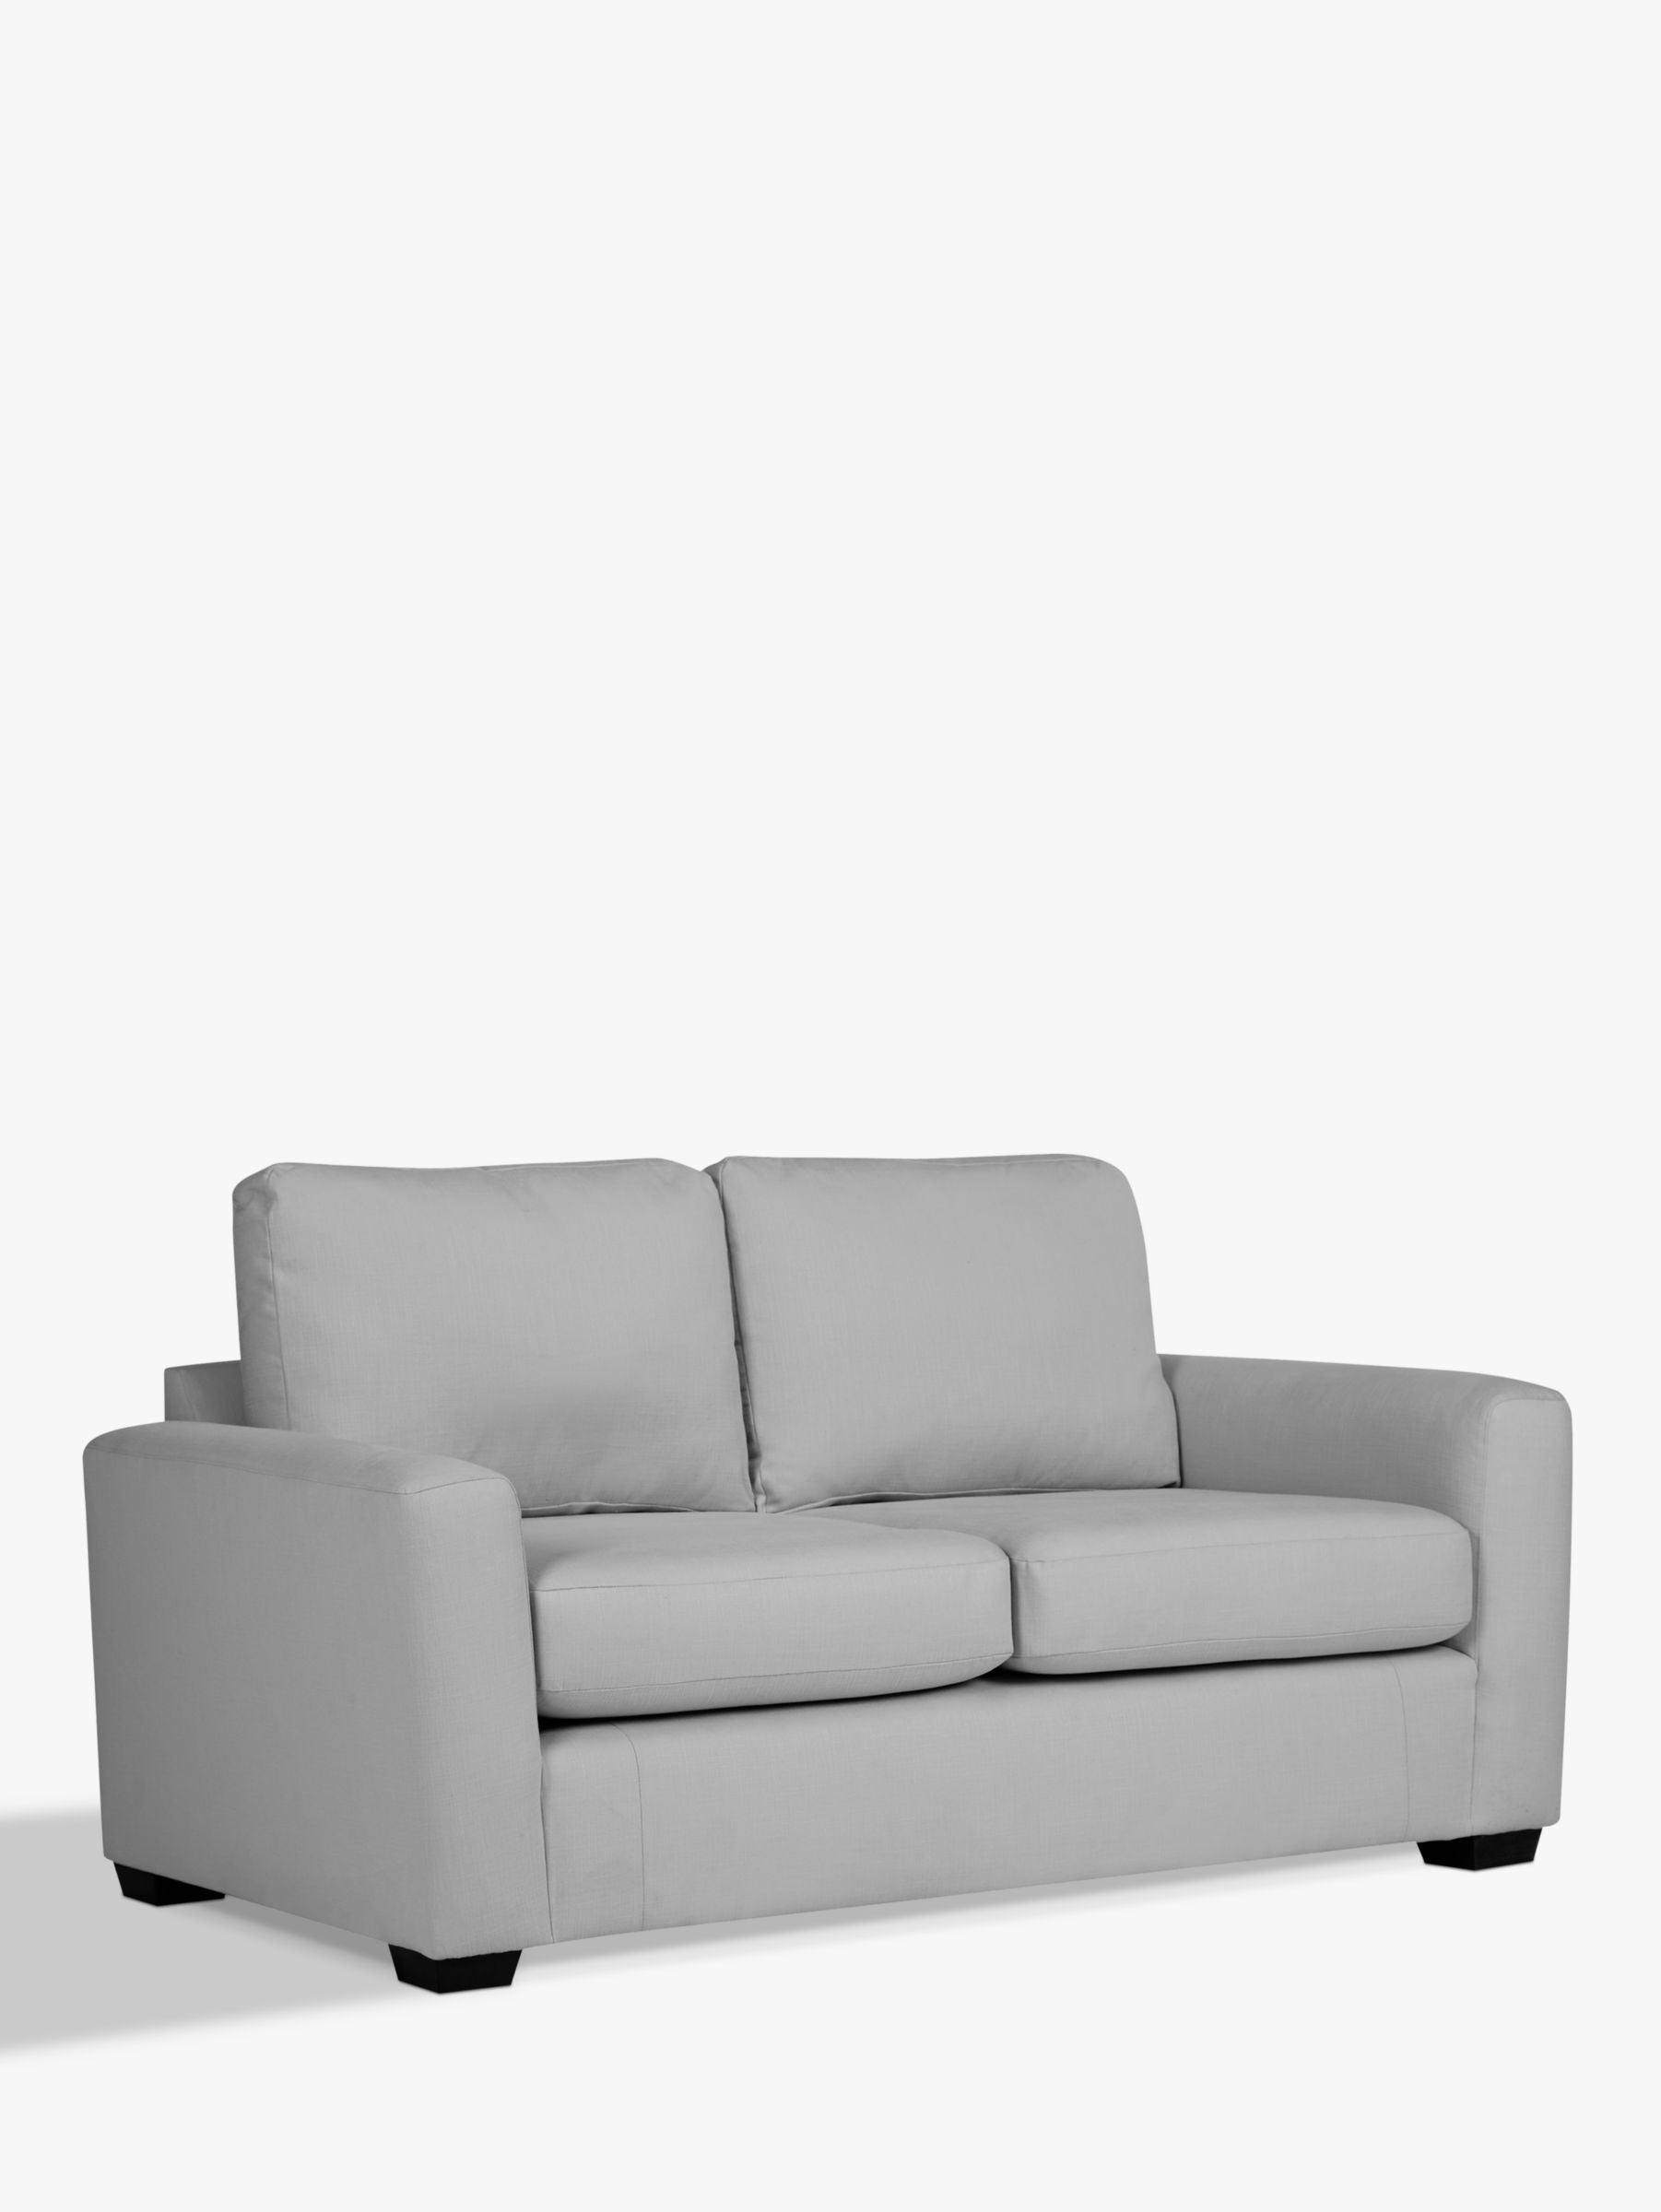 Photo of John lewis oliver small 2 seater sofa